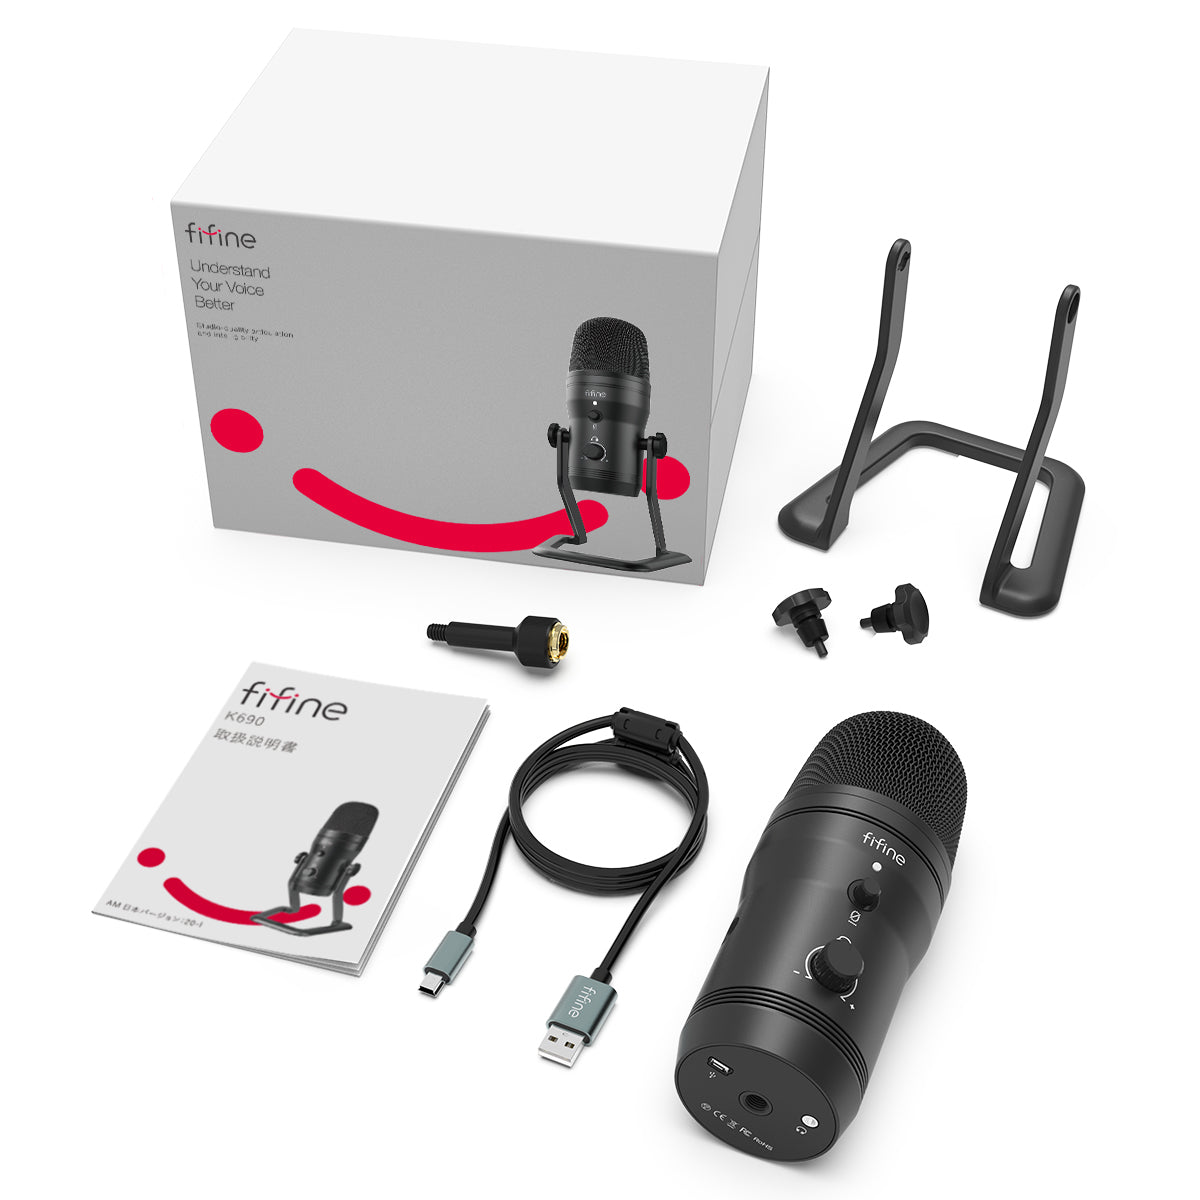 FIFINE K690 USB Mic with Four Polar Patterns, Gain Dials, A Live Monitoring Jack & A Mute Button